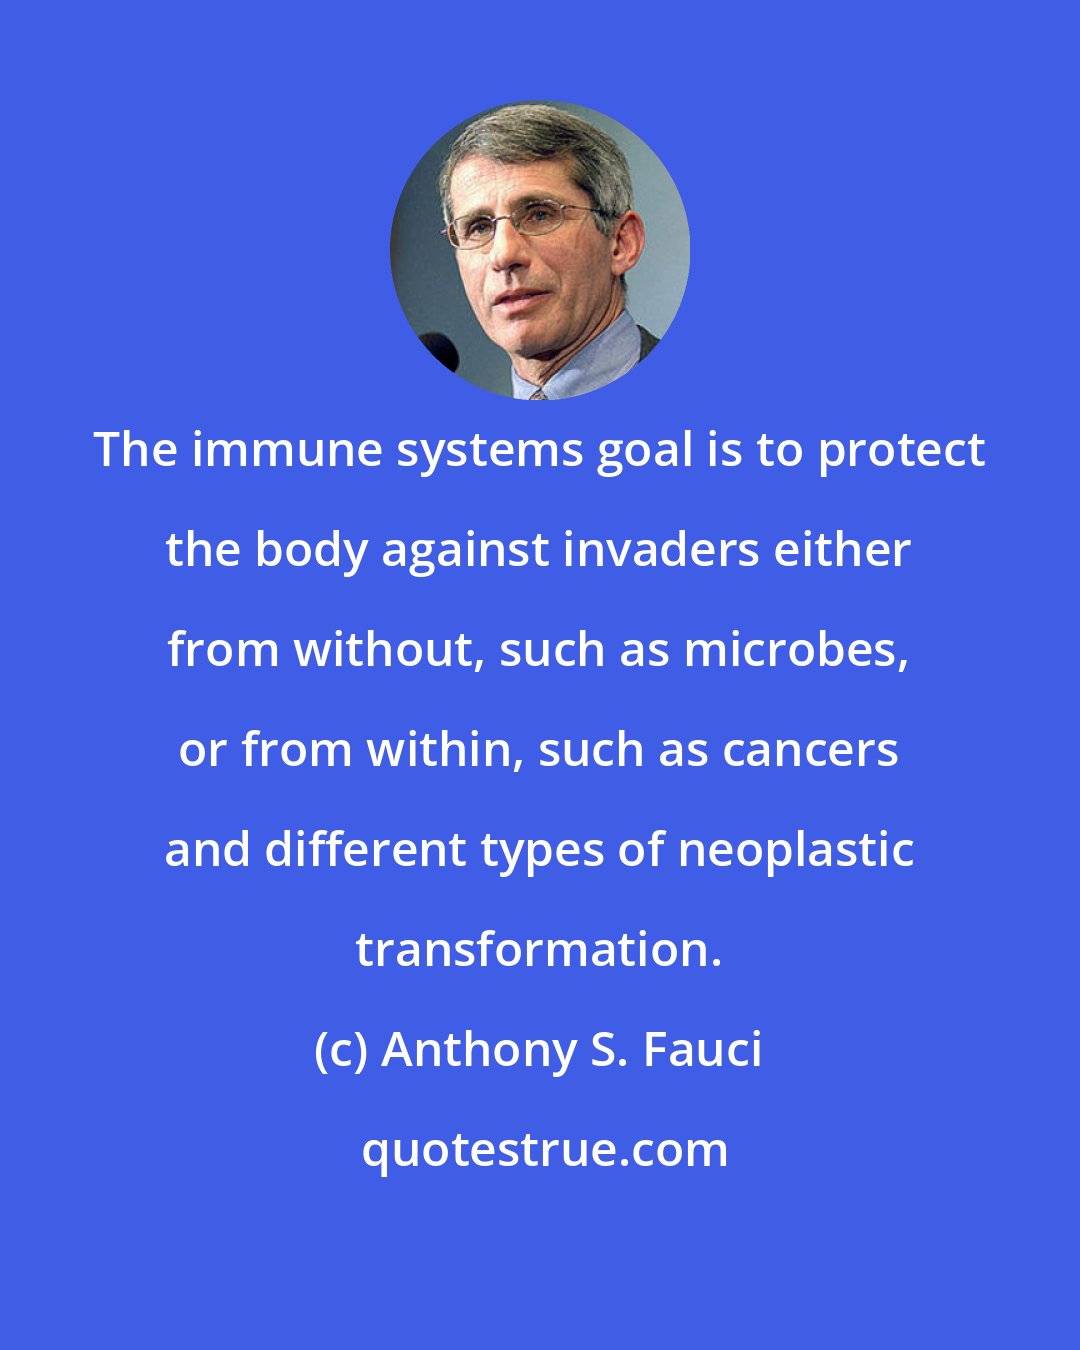 Anthony S. Fauci: The immune systems goal is to protect the body against invaders either from without, such as microbes, or from within, such as cancers and different types of neoplastic transformation.